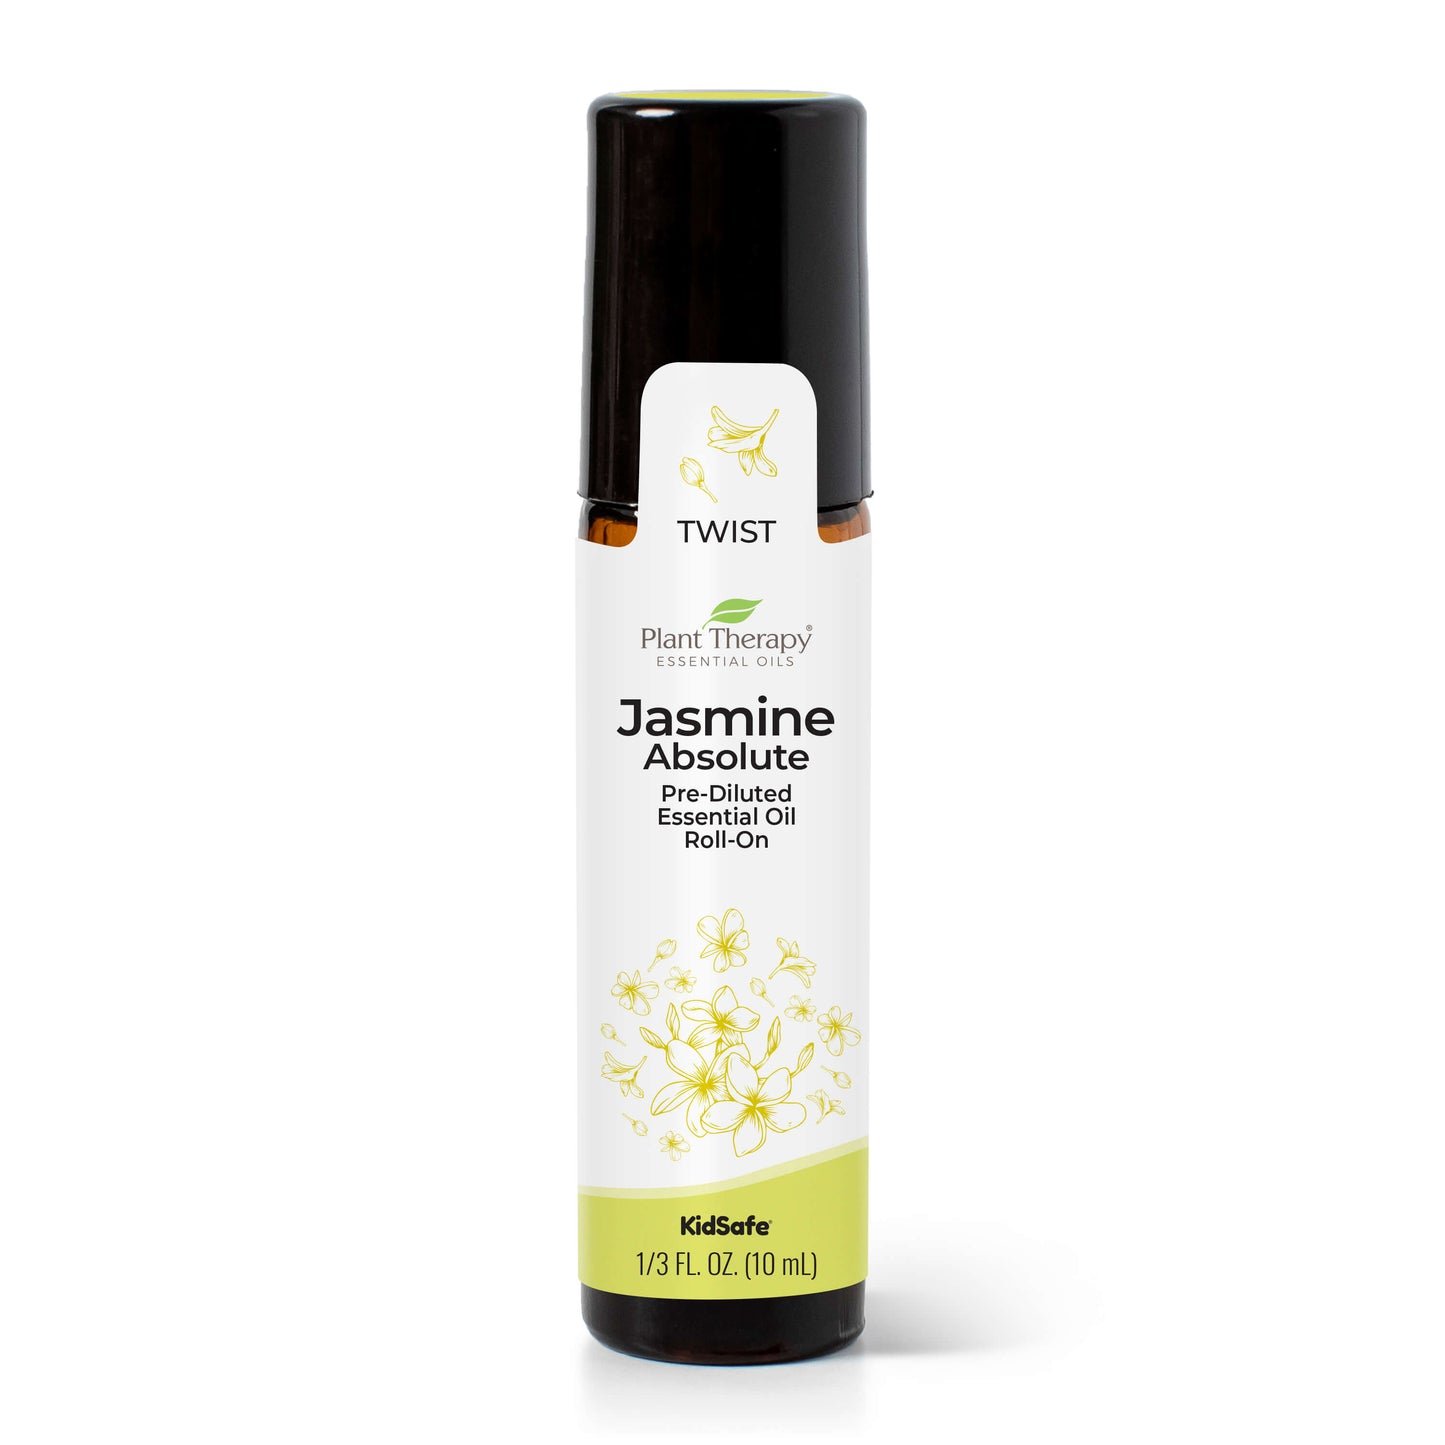 Jasmine Absolute Pre-Diluted Roll-On